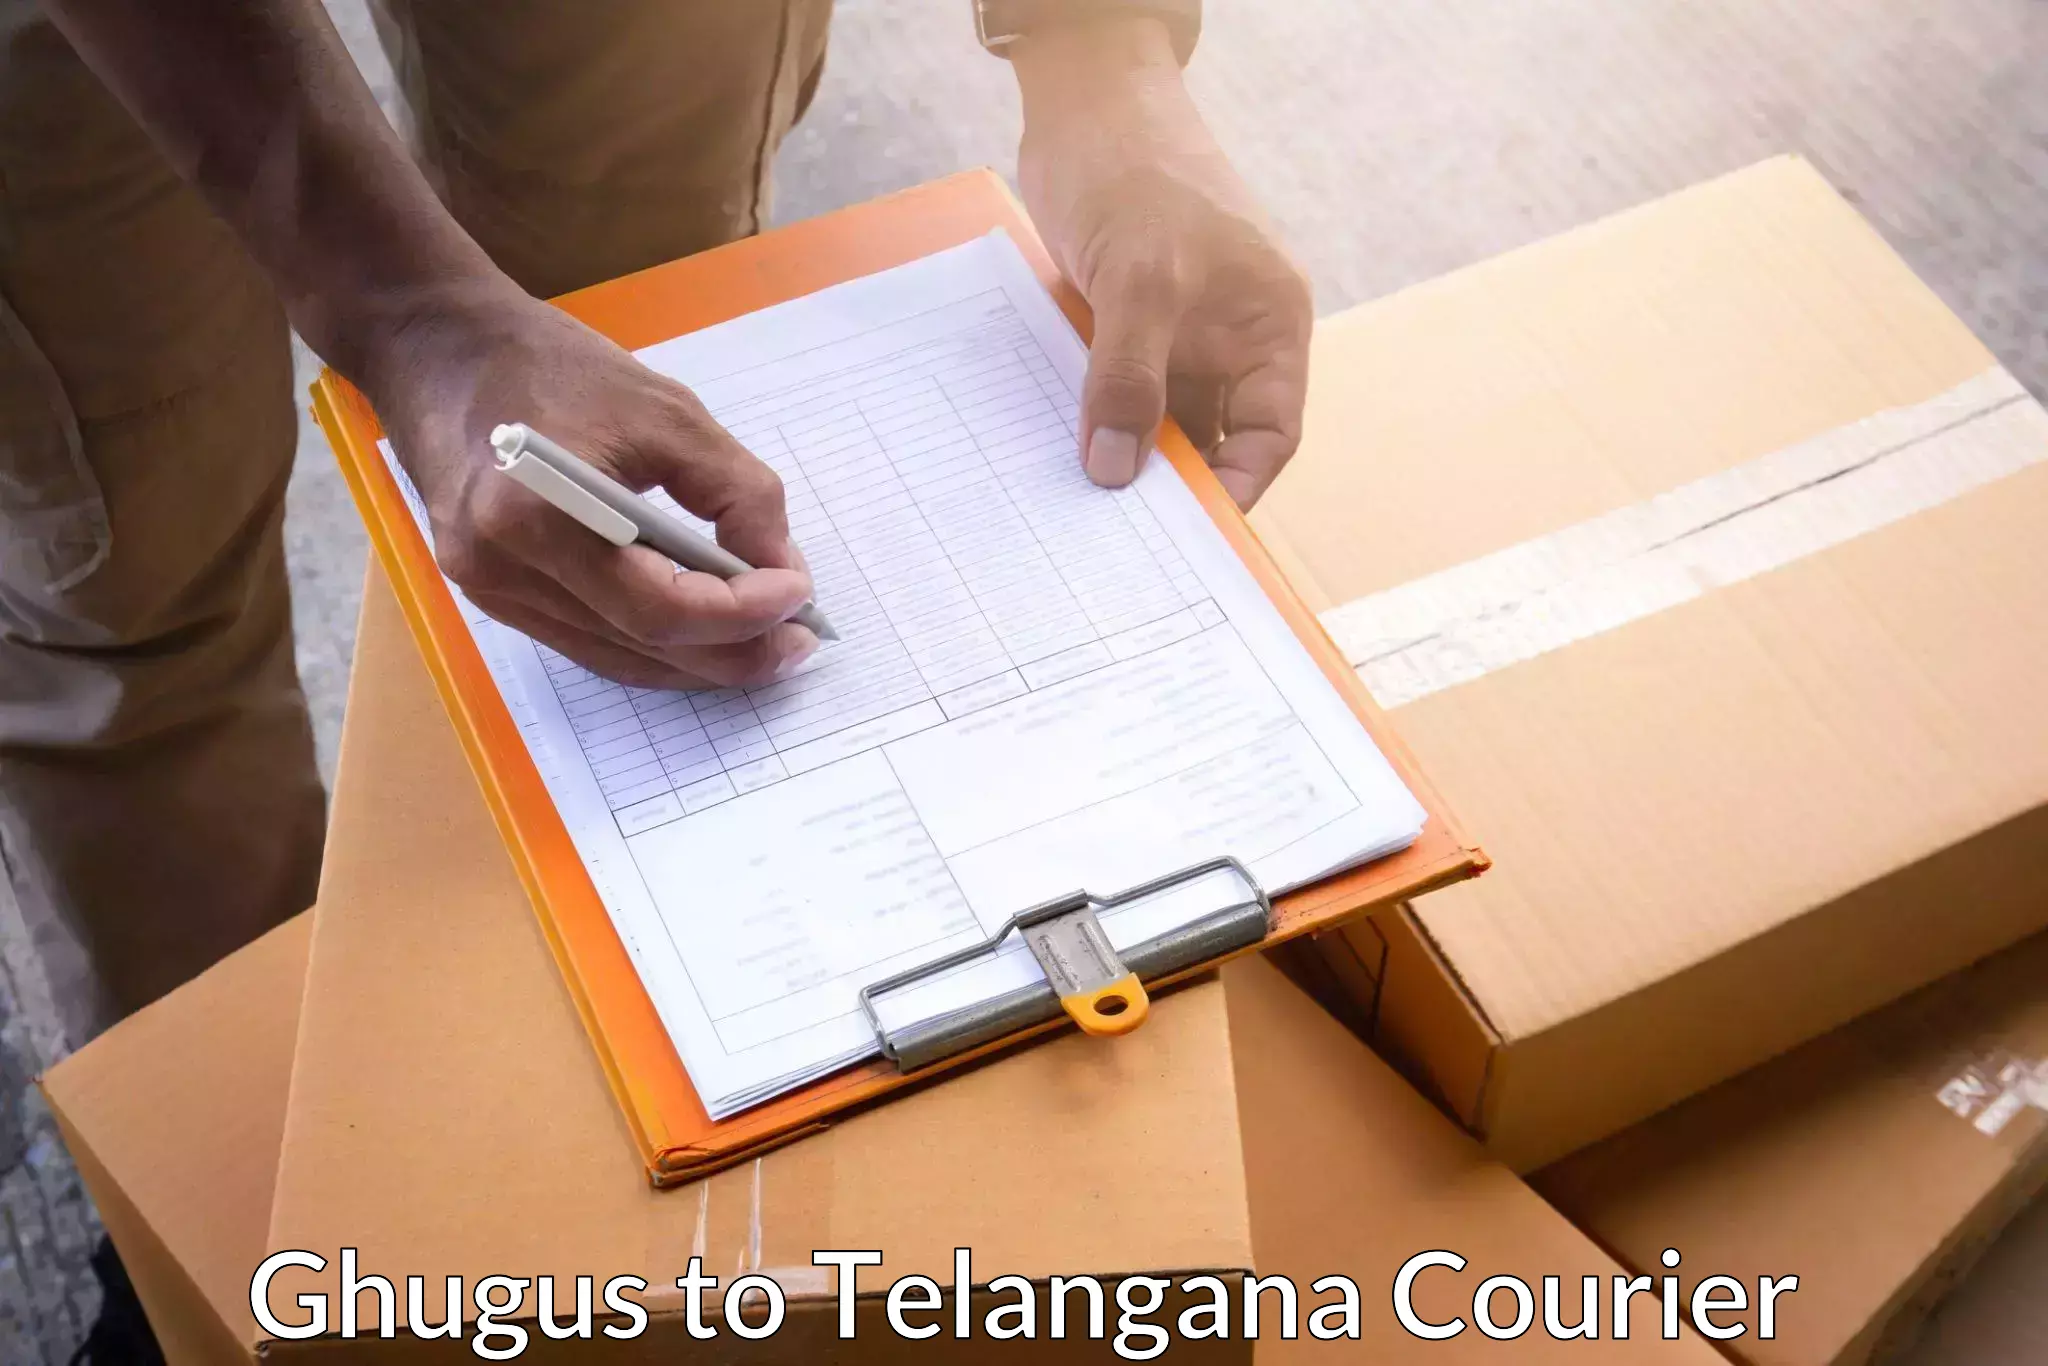 Nationwide shipping coverage Ghugus to Secunderabad